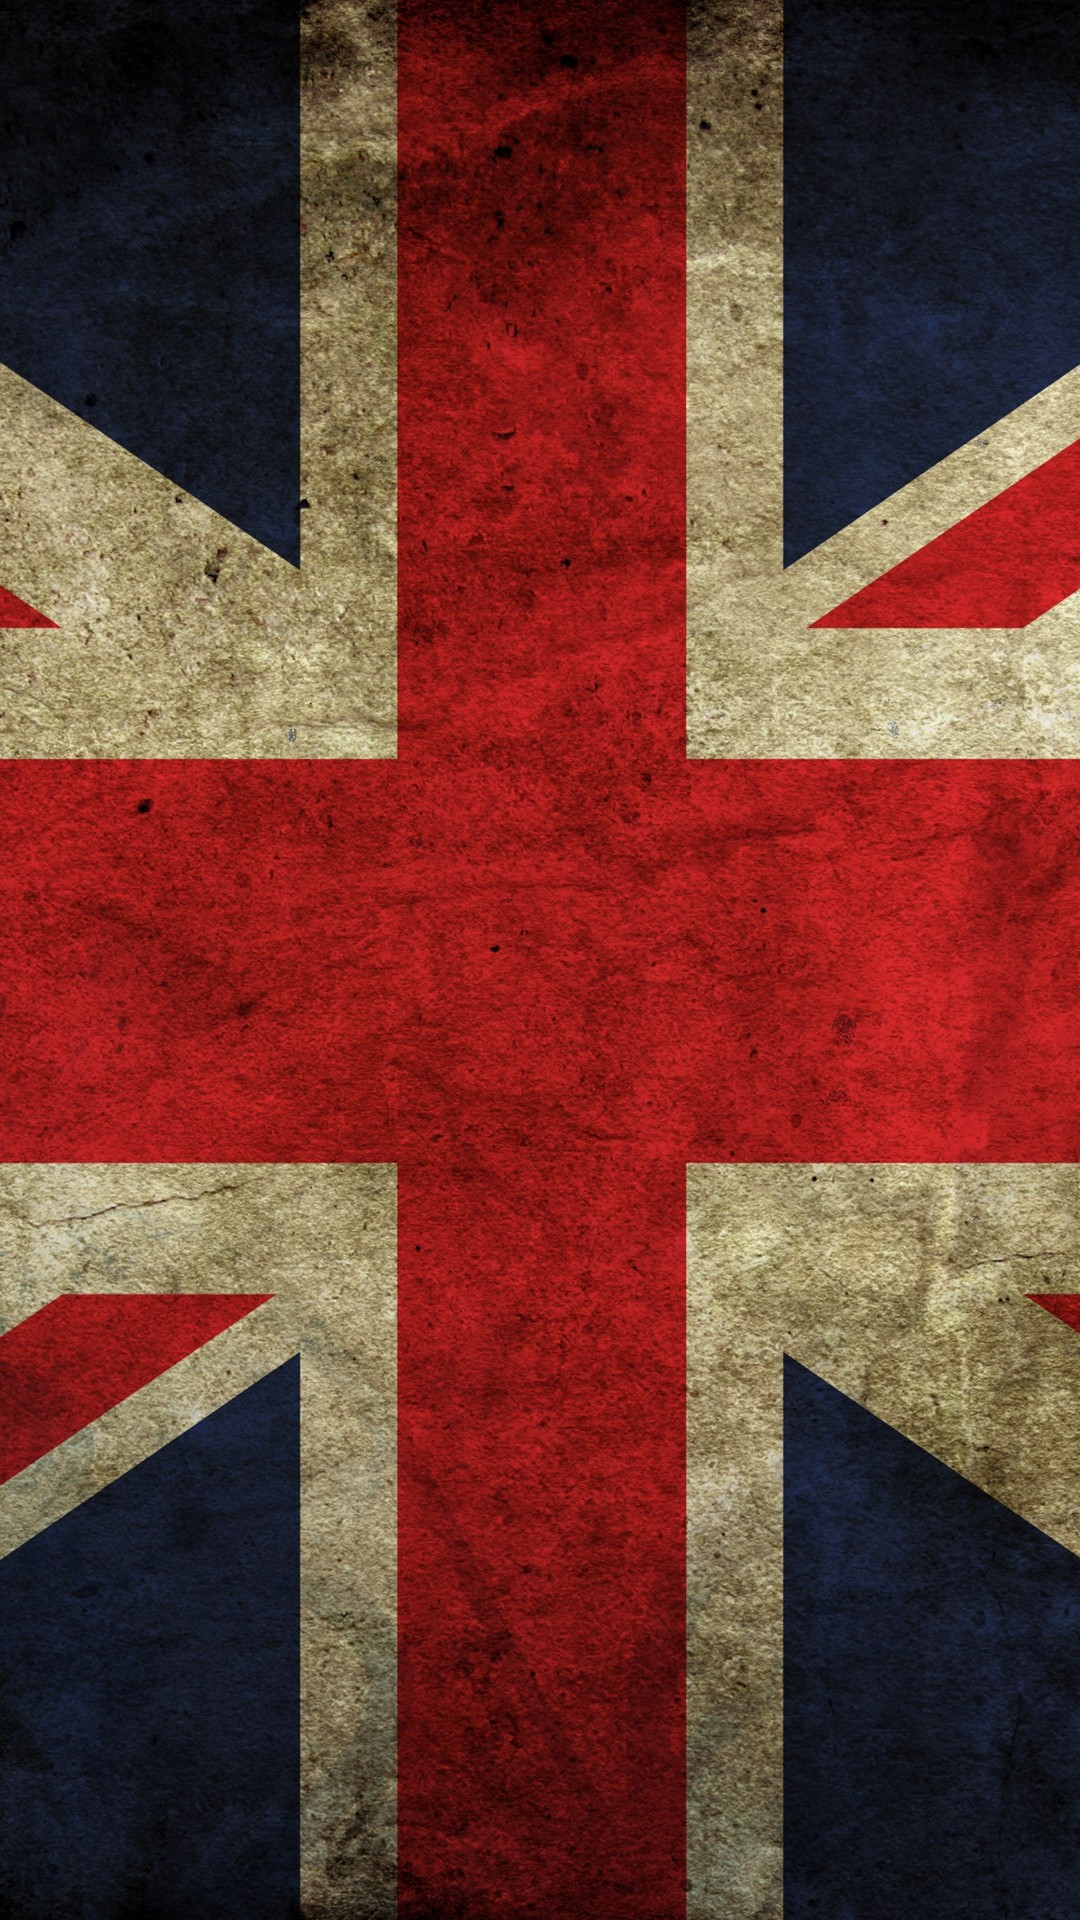 1080x1920 Grungy vintage British Flag iPhone 6 Wallpapers. Tap to see more iPhone  wallpapers, lockscreen